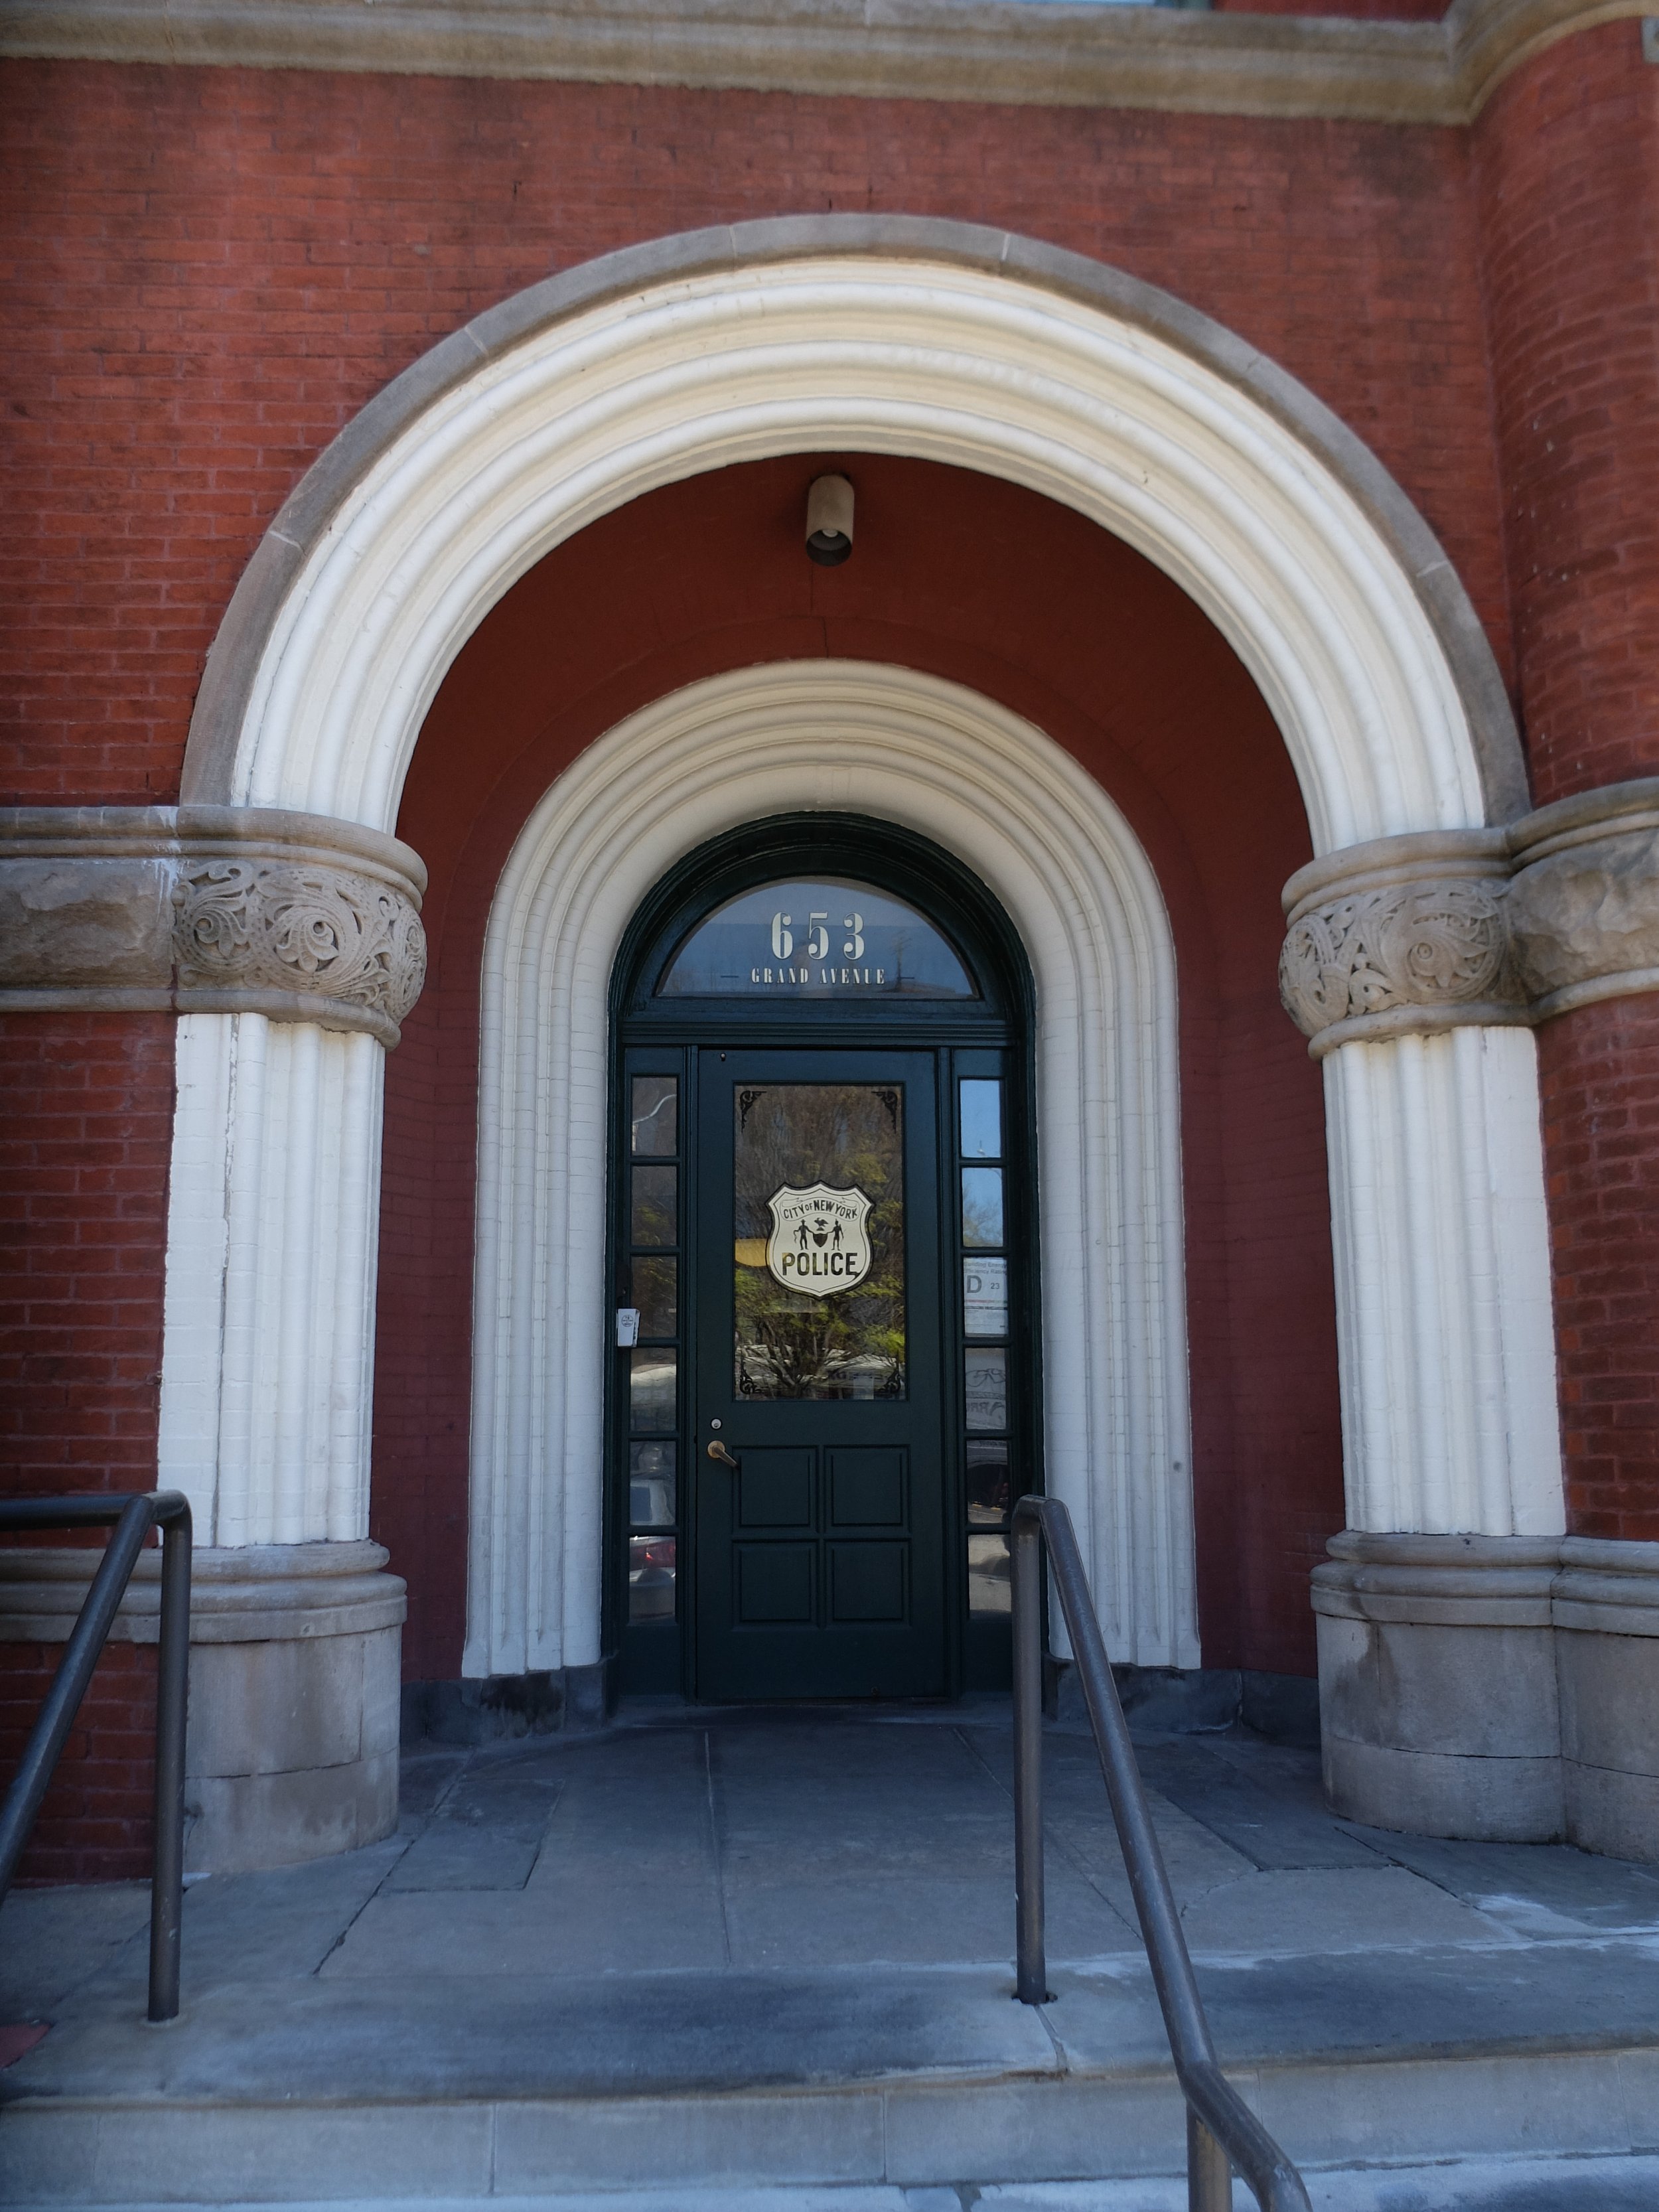  The former, c. 1890’s, 22nd Precinct is the NYPD’s Special Victims Division. The facilities have gotten some major upgrades, from new paint jobs to new waiting areas and plant-lined interview rooms for survivors.   